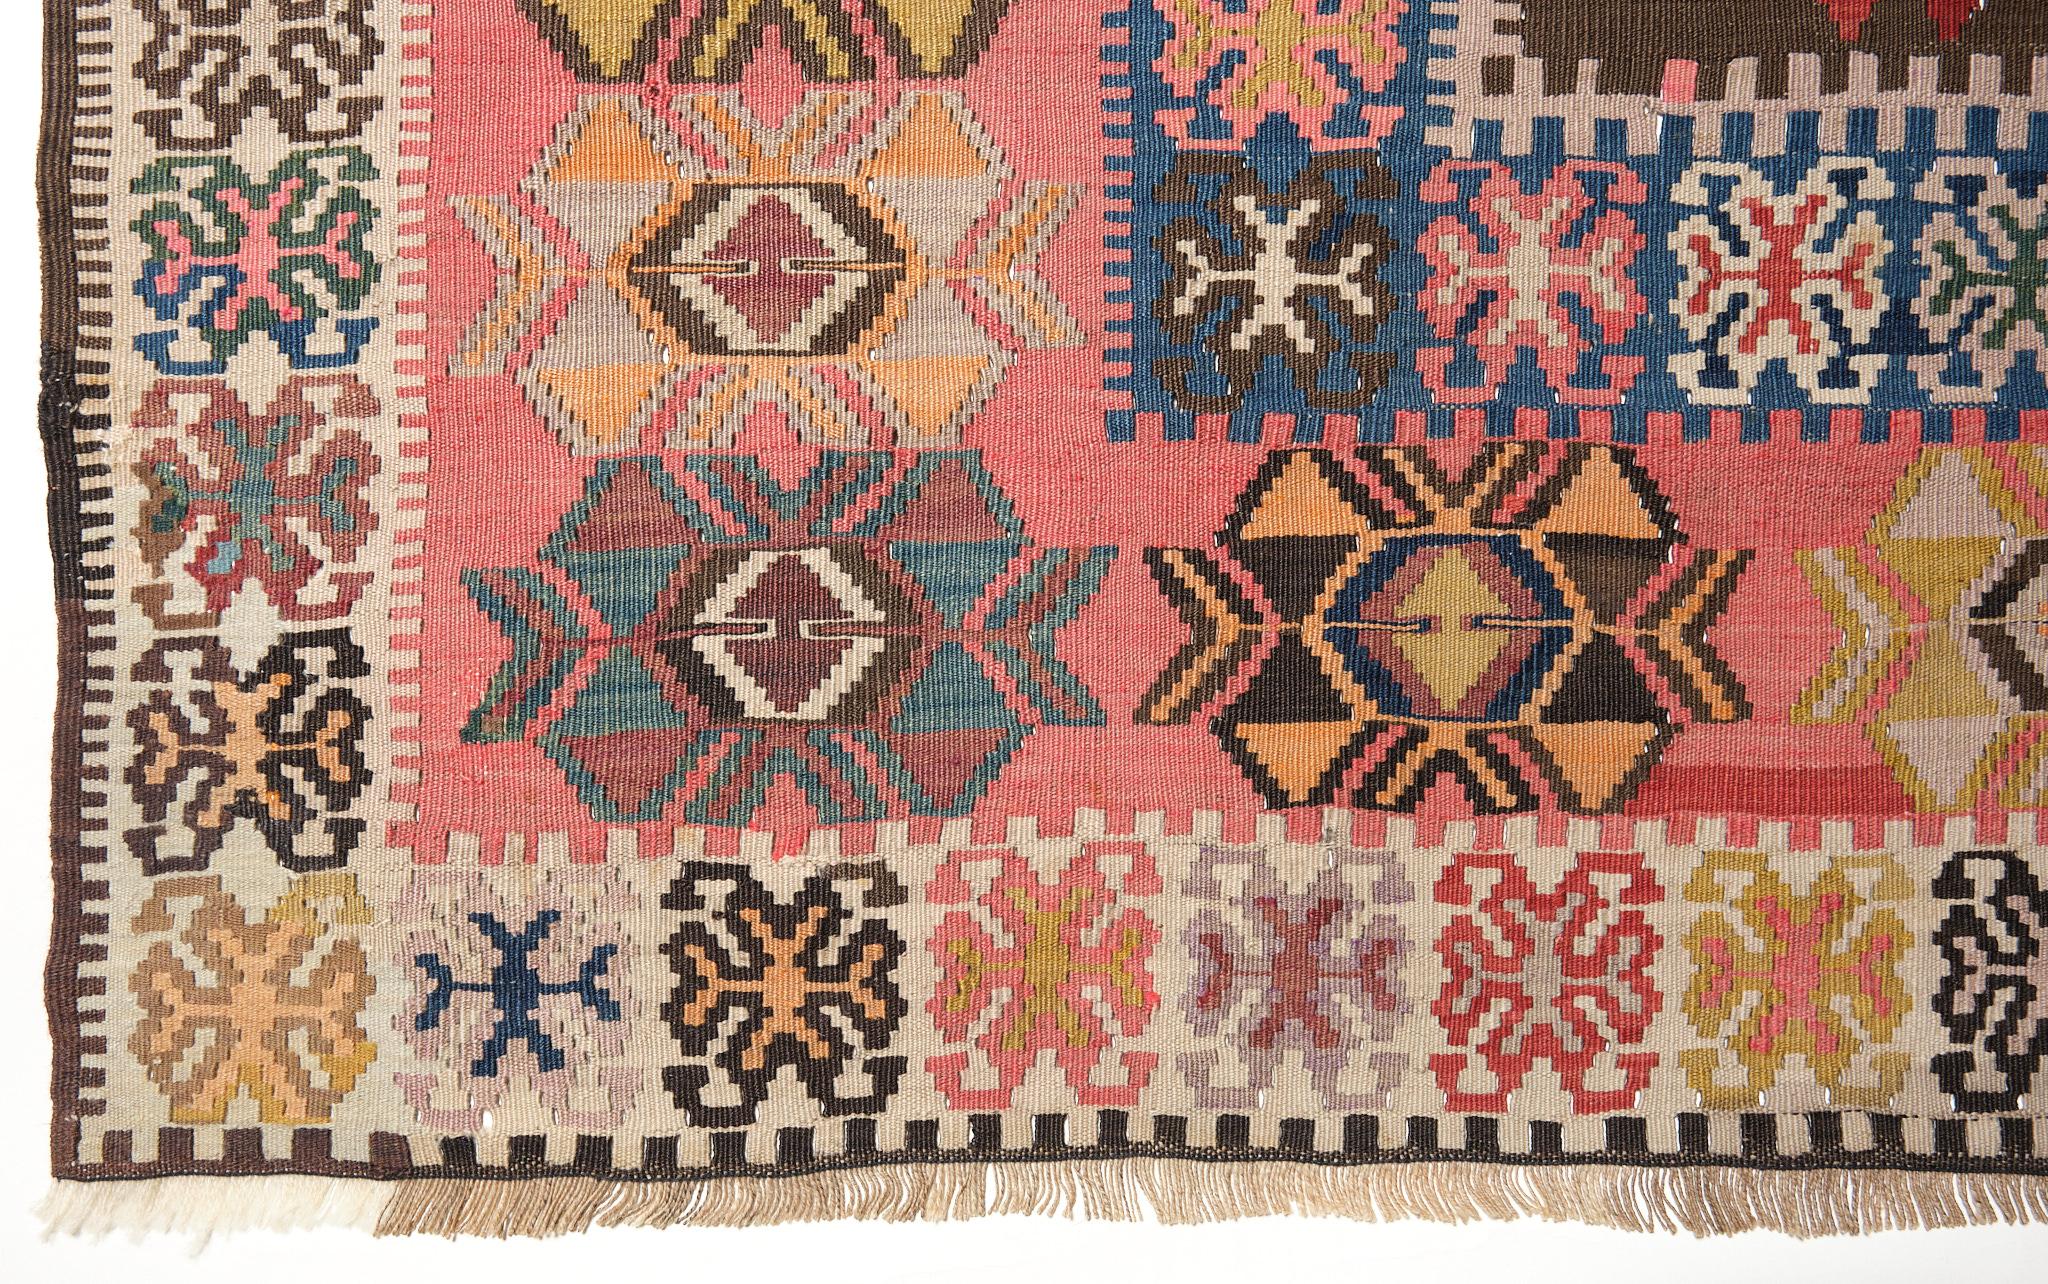 This is an Eastern Anatolian Antique Kilim from the Bayburt region with a rare and beautiful color composition.

The deep green in the central field is particularly impressive and rare, and the combination of blue, pink, red, and countless other